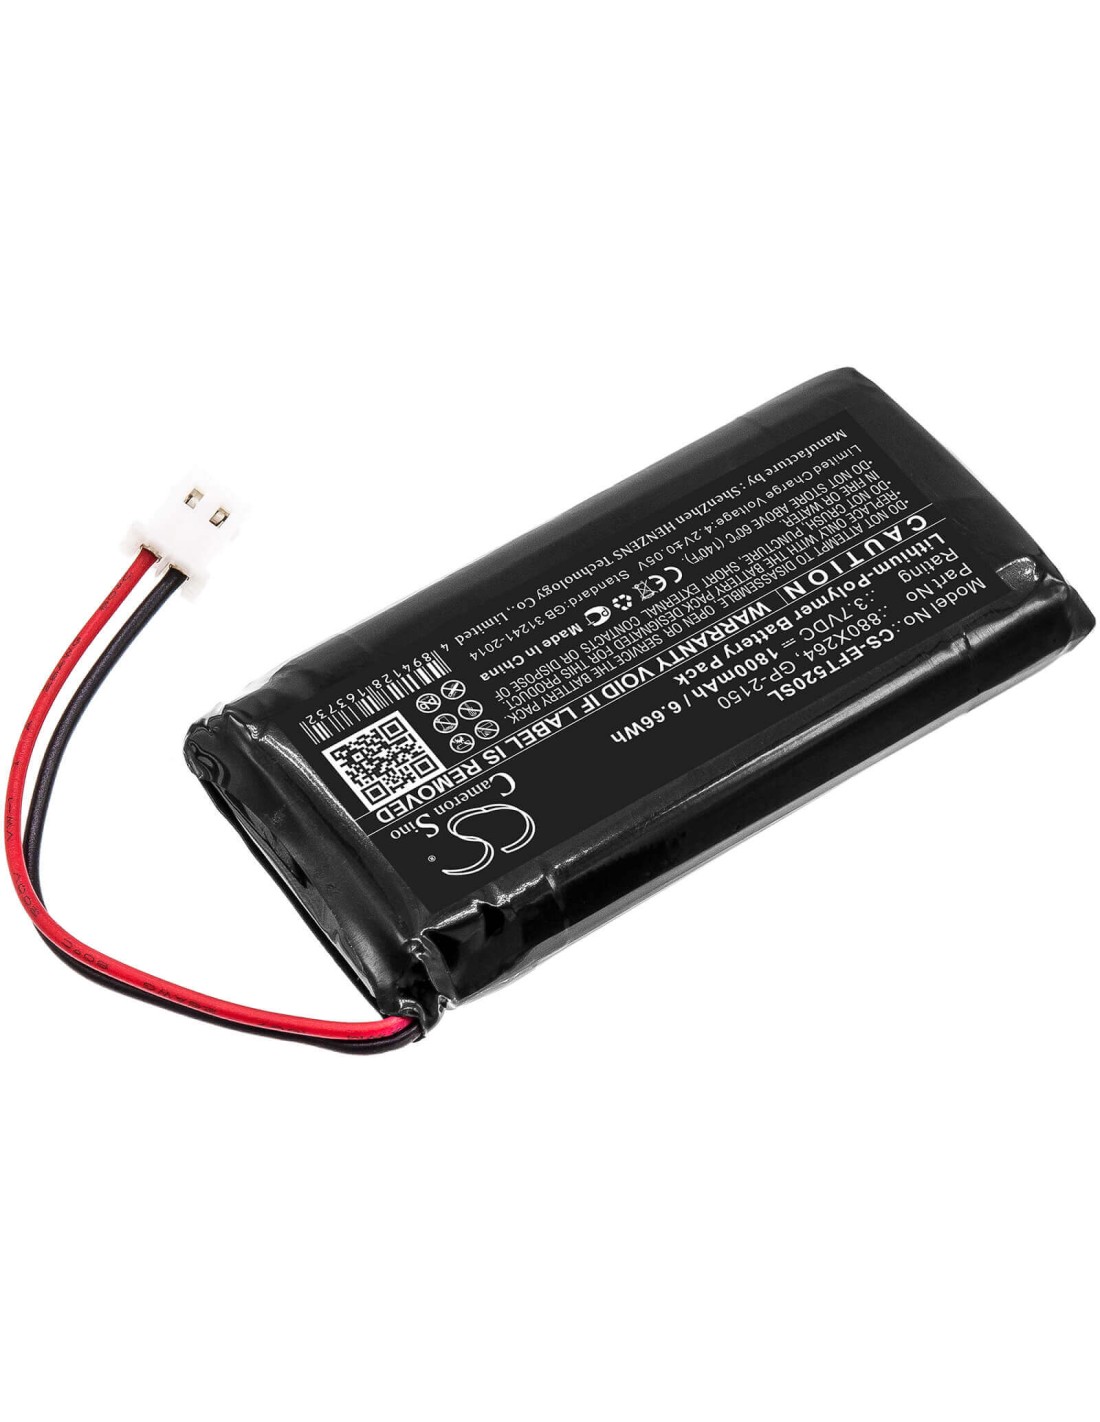 Battery for Exfo, Fot-5200 3.7V, 1800mAh - 6.66Wh